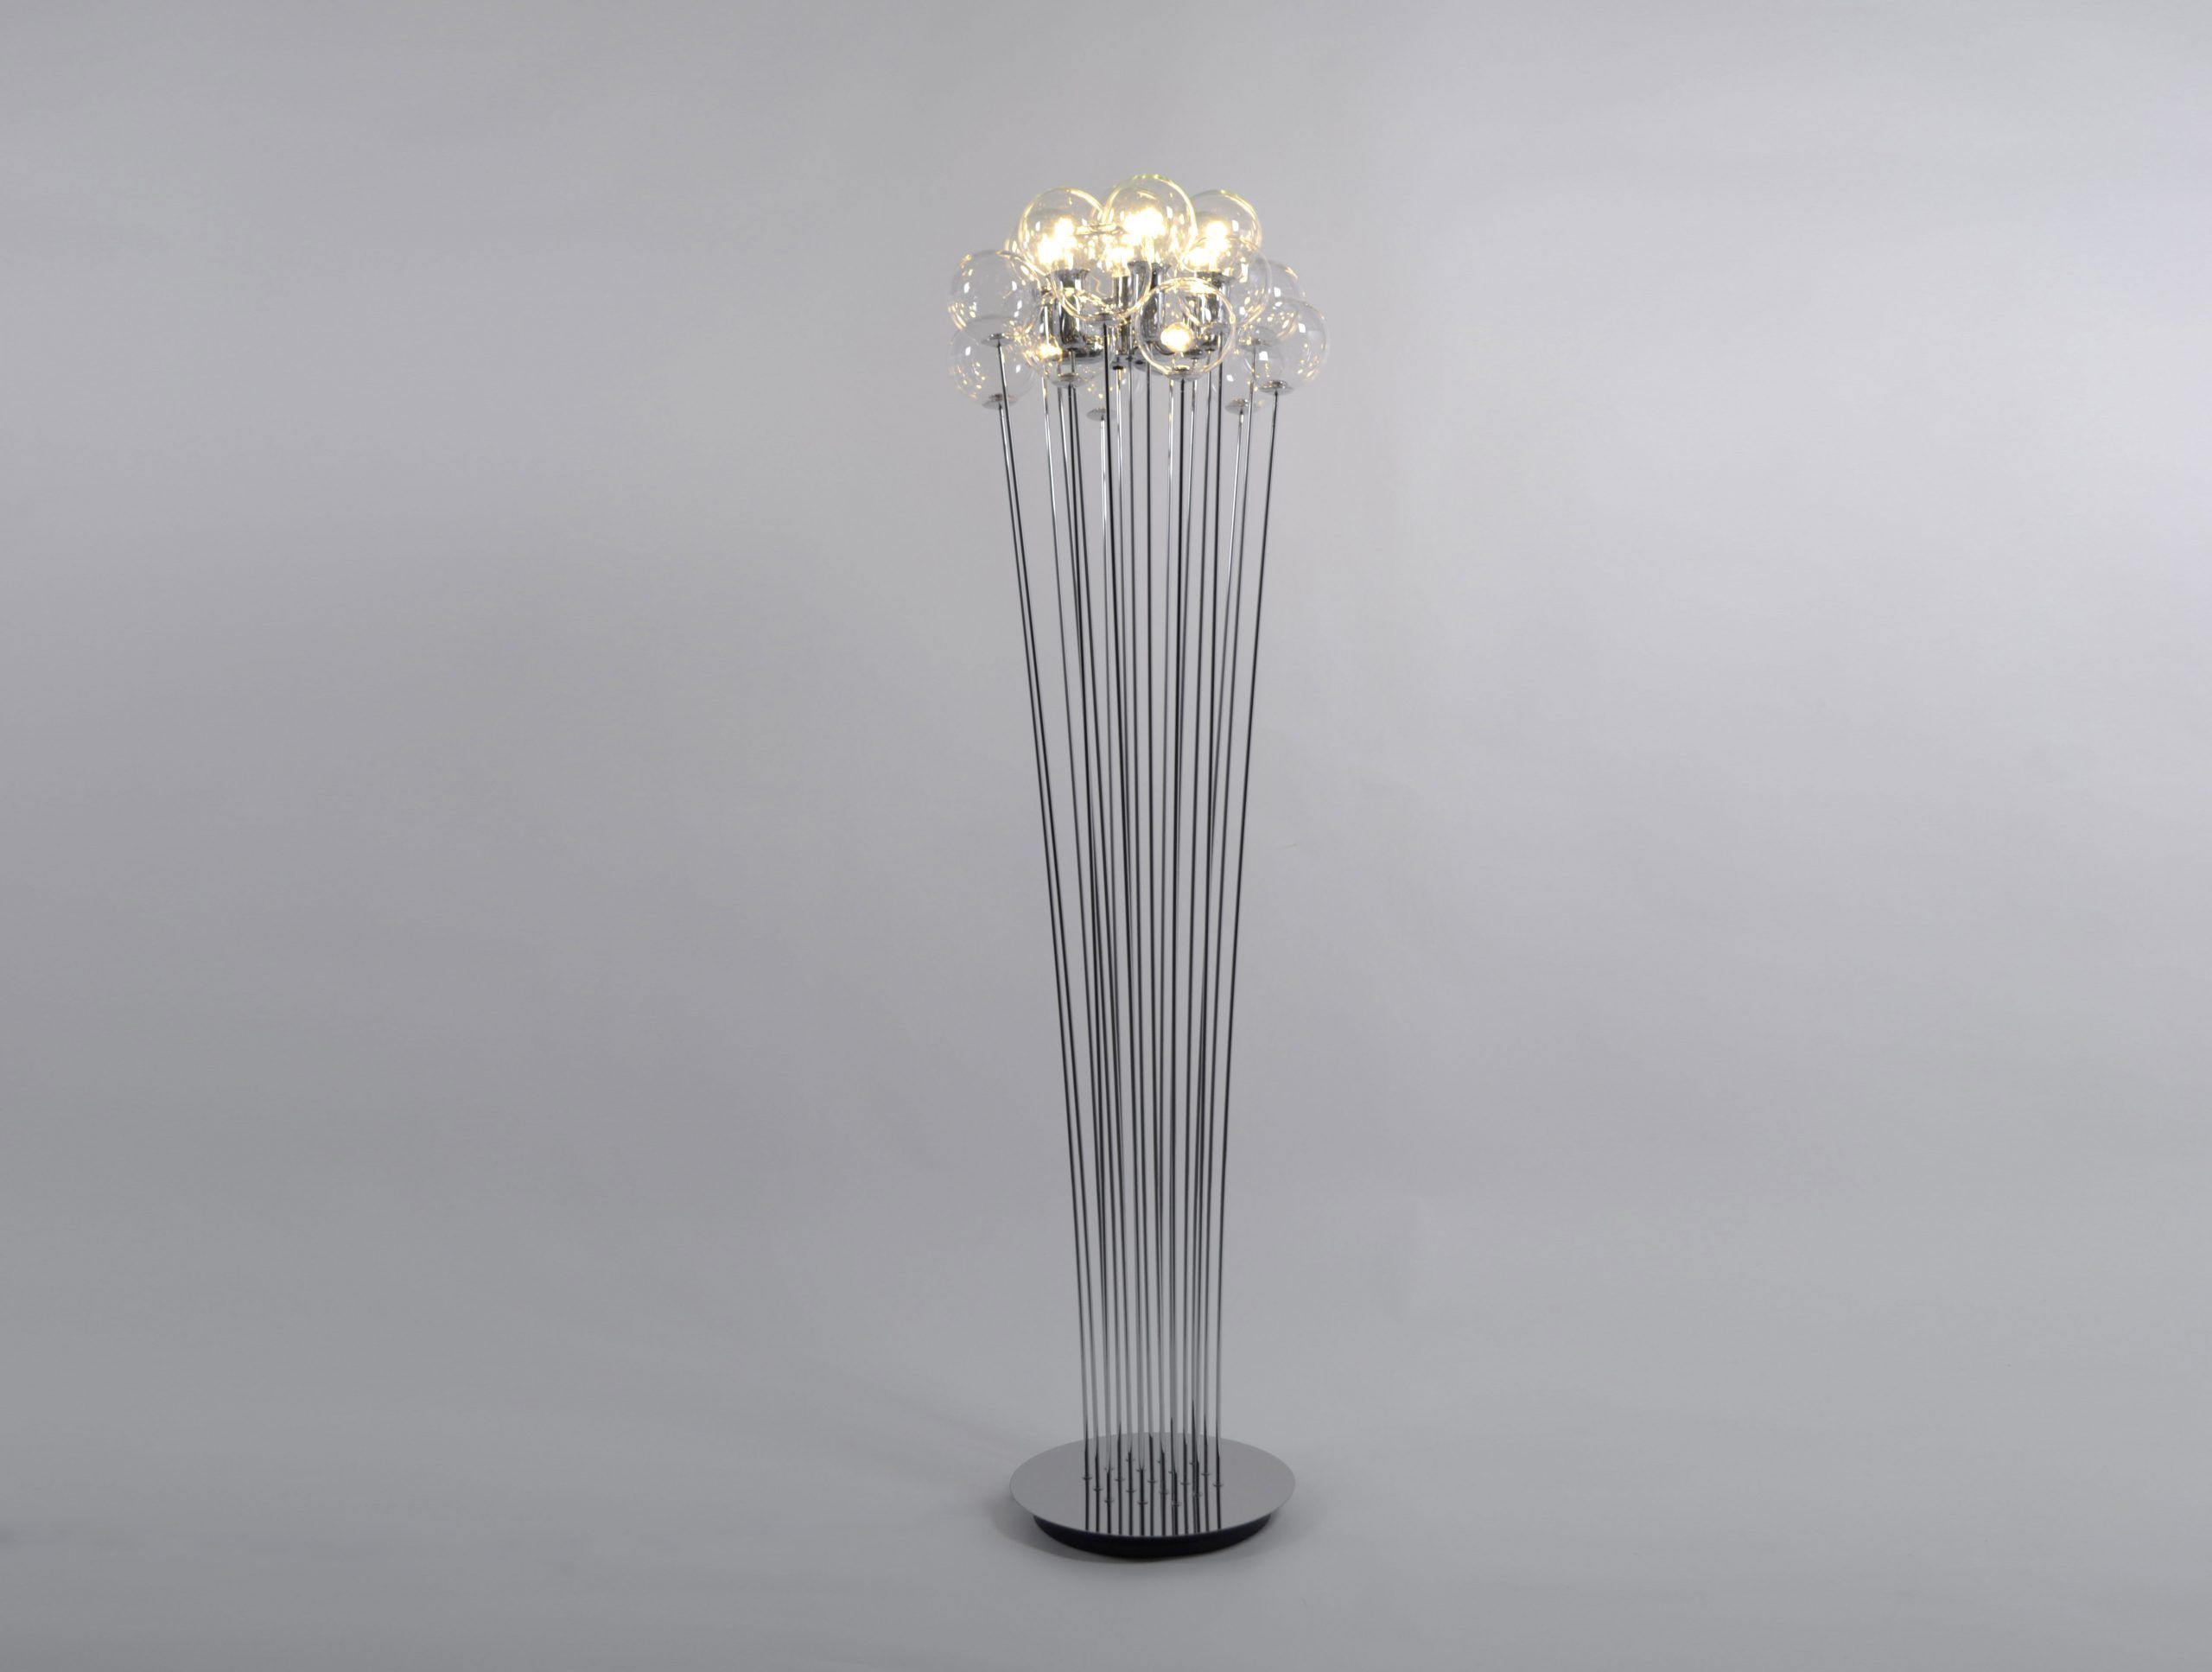 Widely Used Sphere Floor Lamps Pertaining To Sphere Floor Lamp Led Floor Lamp Design (View 13 of 15)